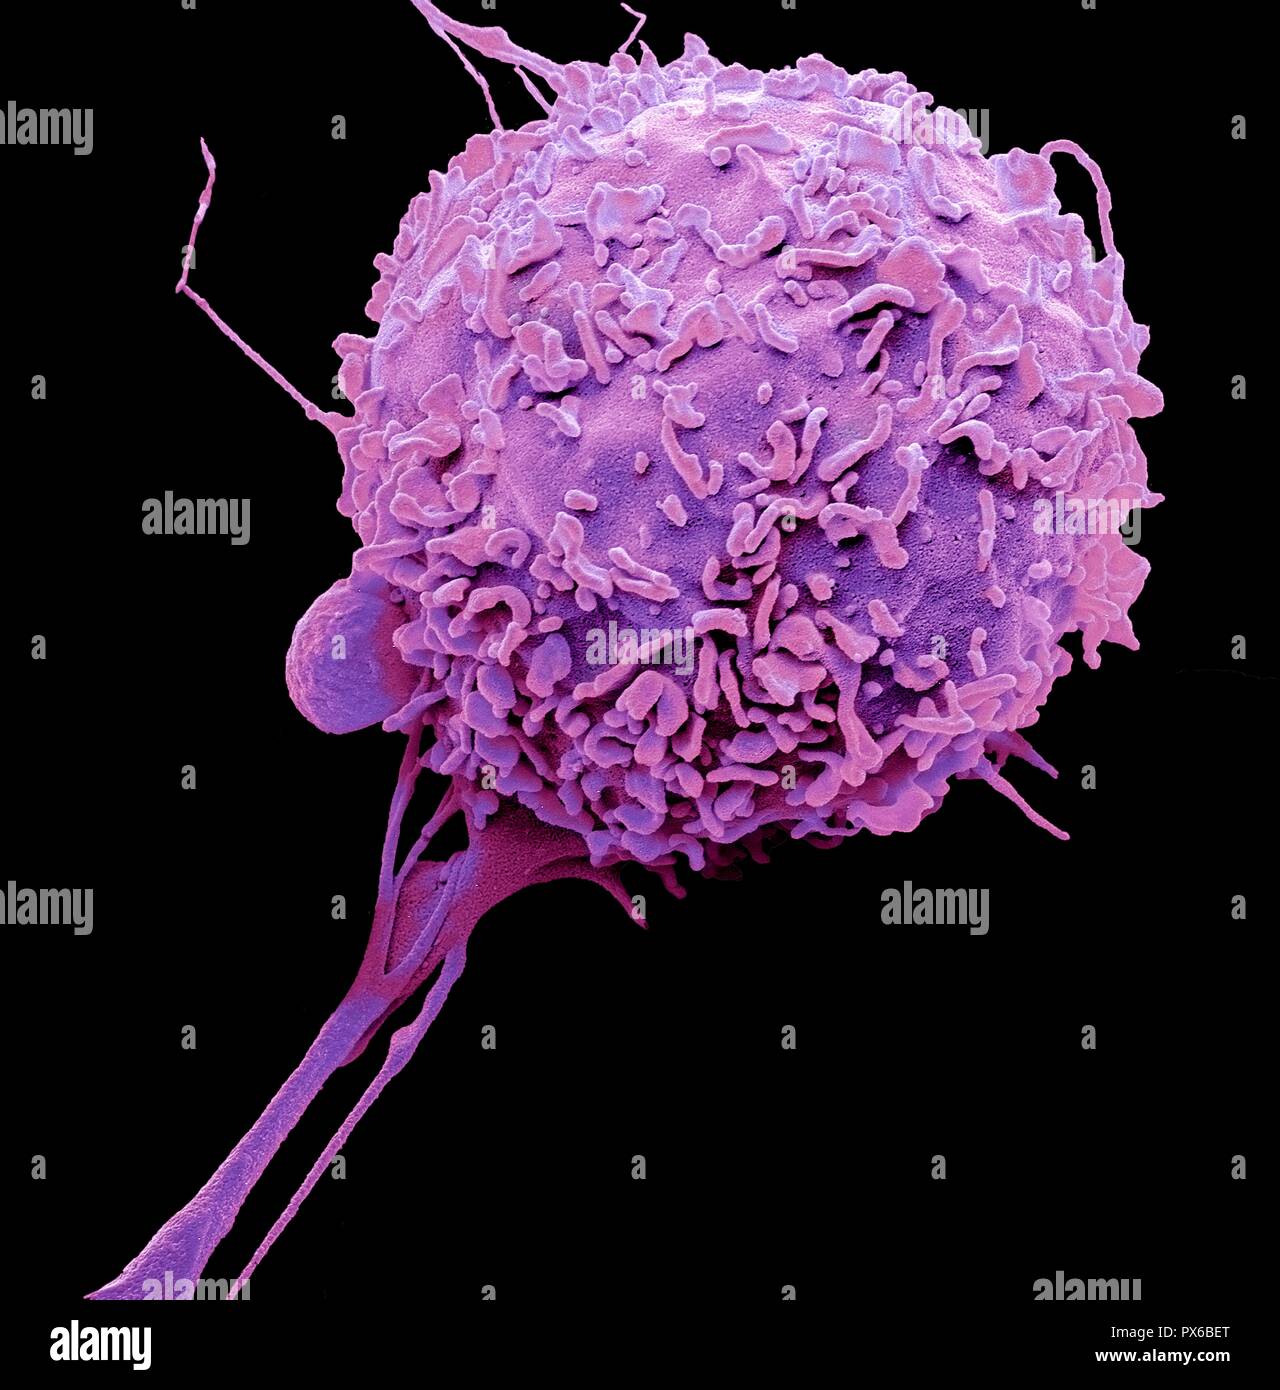 Macrophage. Coloured scanning electron micrograph (SEM) of a macrophage white blood cell. Macrophages are cells of the body's immune system. They are found in the tissues rather than in the circulating blood. Macrophages recognise foreign particles, including bacteria, pollen and dust, and phagocytose (engulf) and digest them. Magnification: x4000 when printed at 10 centimetres wide. Stock Photo